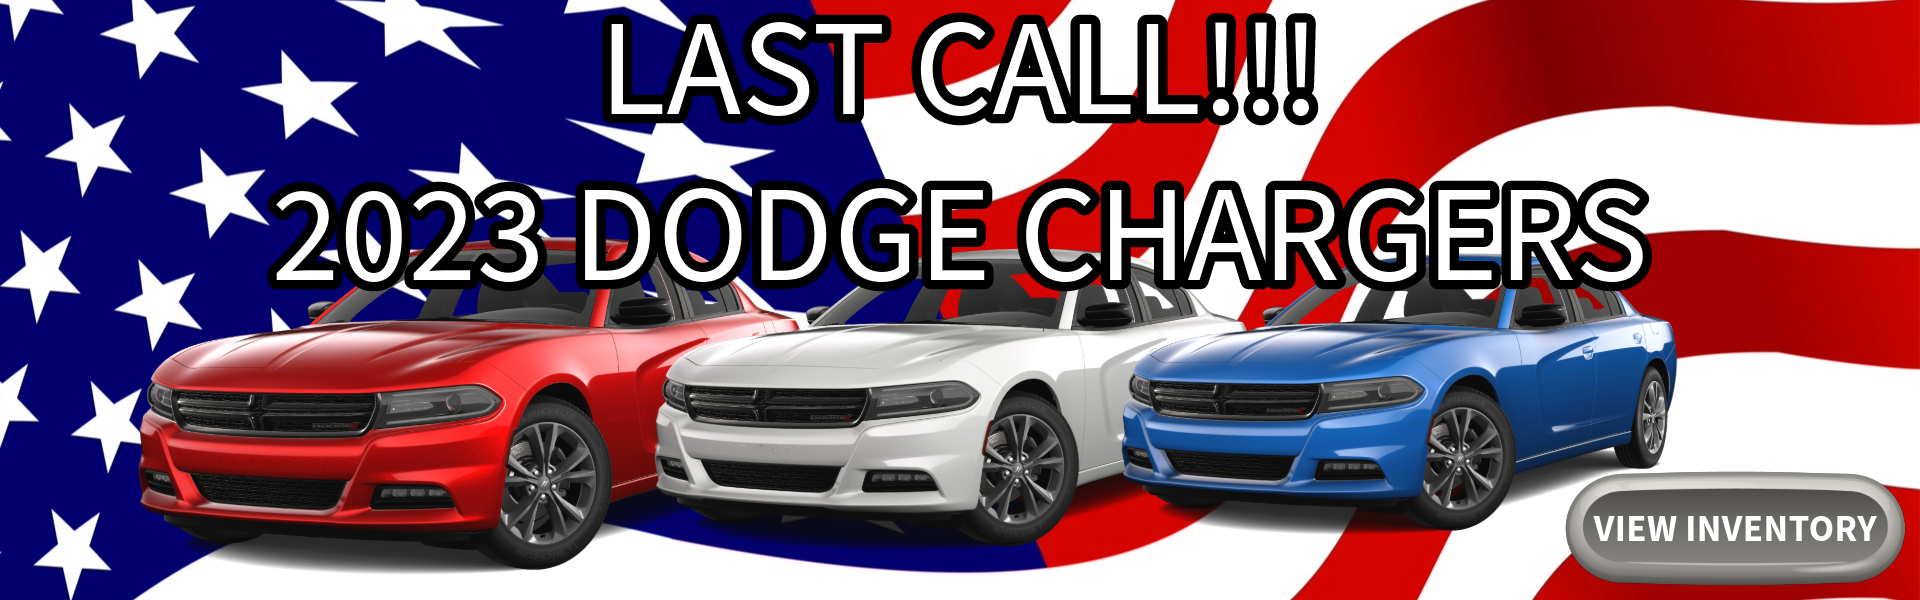 2023 Dodge Chargers Last Call